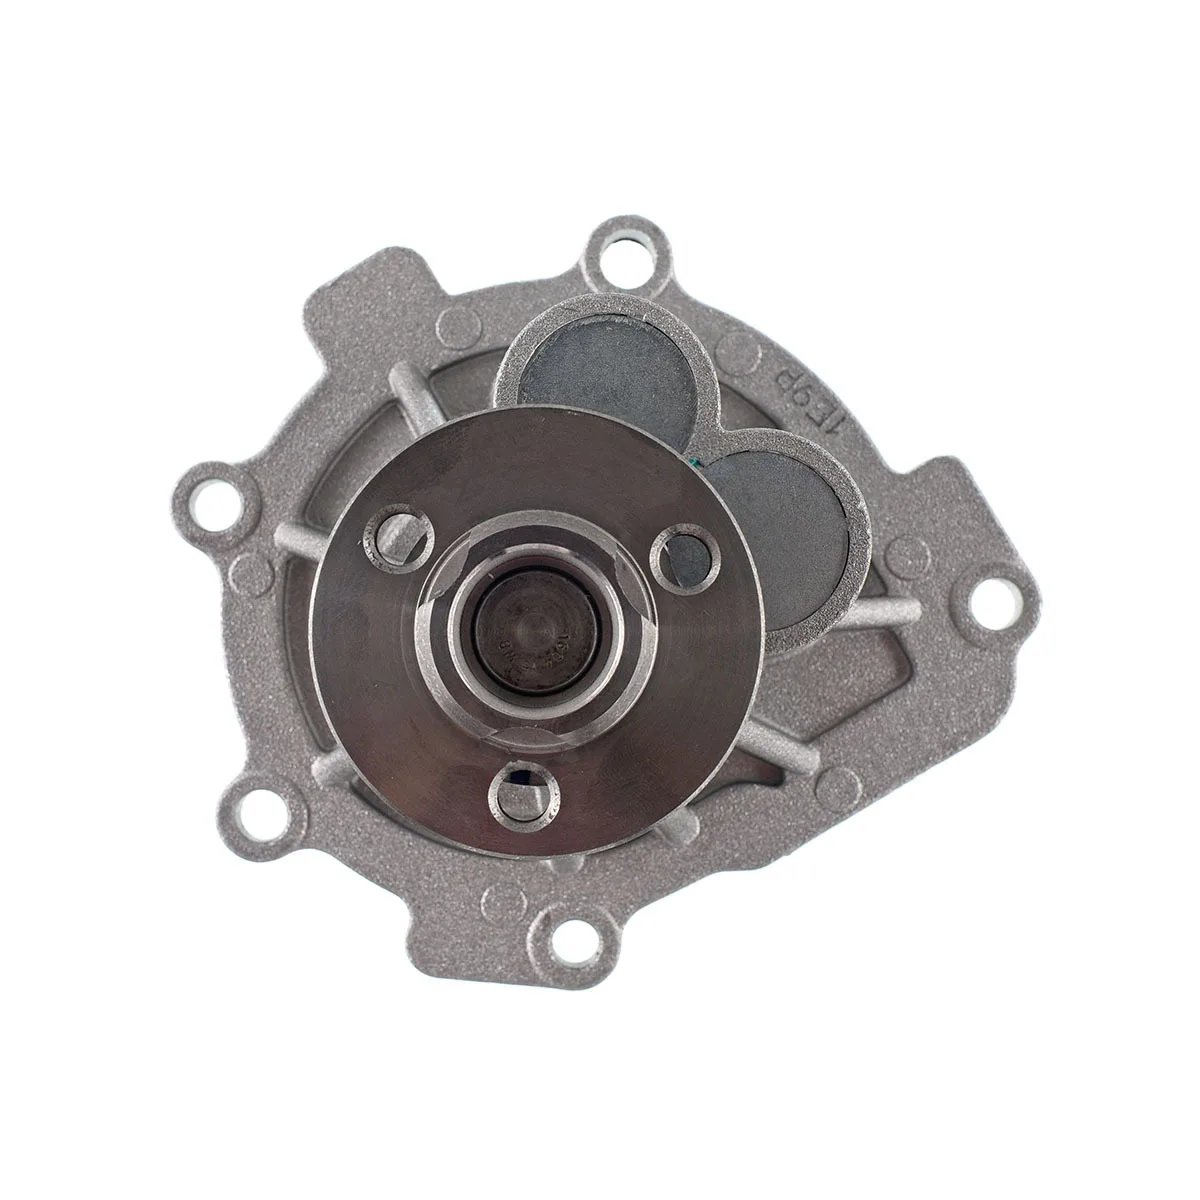 

A3 Repair Shop In-stock CN US CA AU Water Pump for Chevrolet Aveo Aveo5 Cruze Sonic G3 Wave Astra 1.6L 1.8L AW6184 24405895